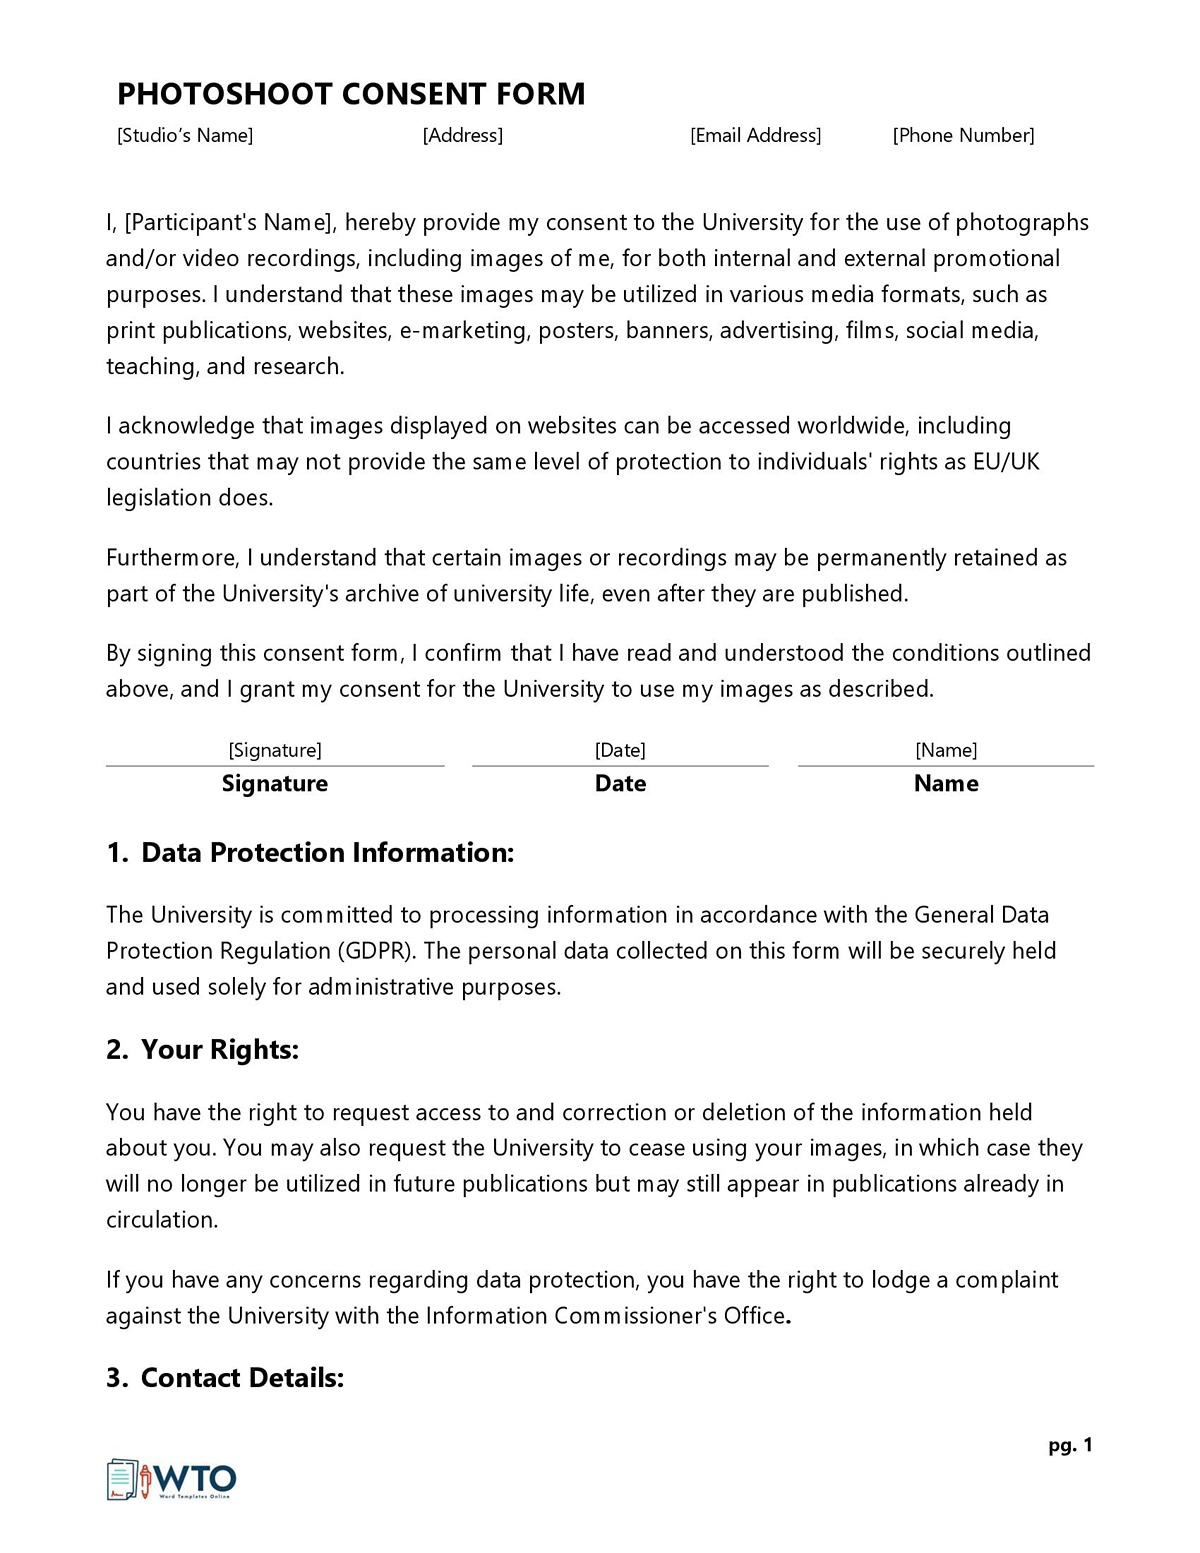 Consent Agreement for Photoshoots